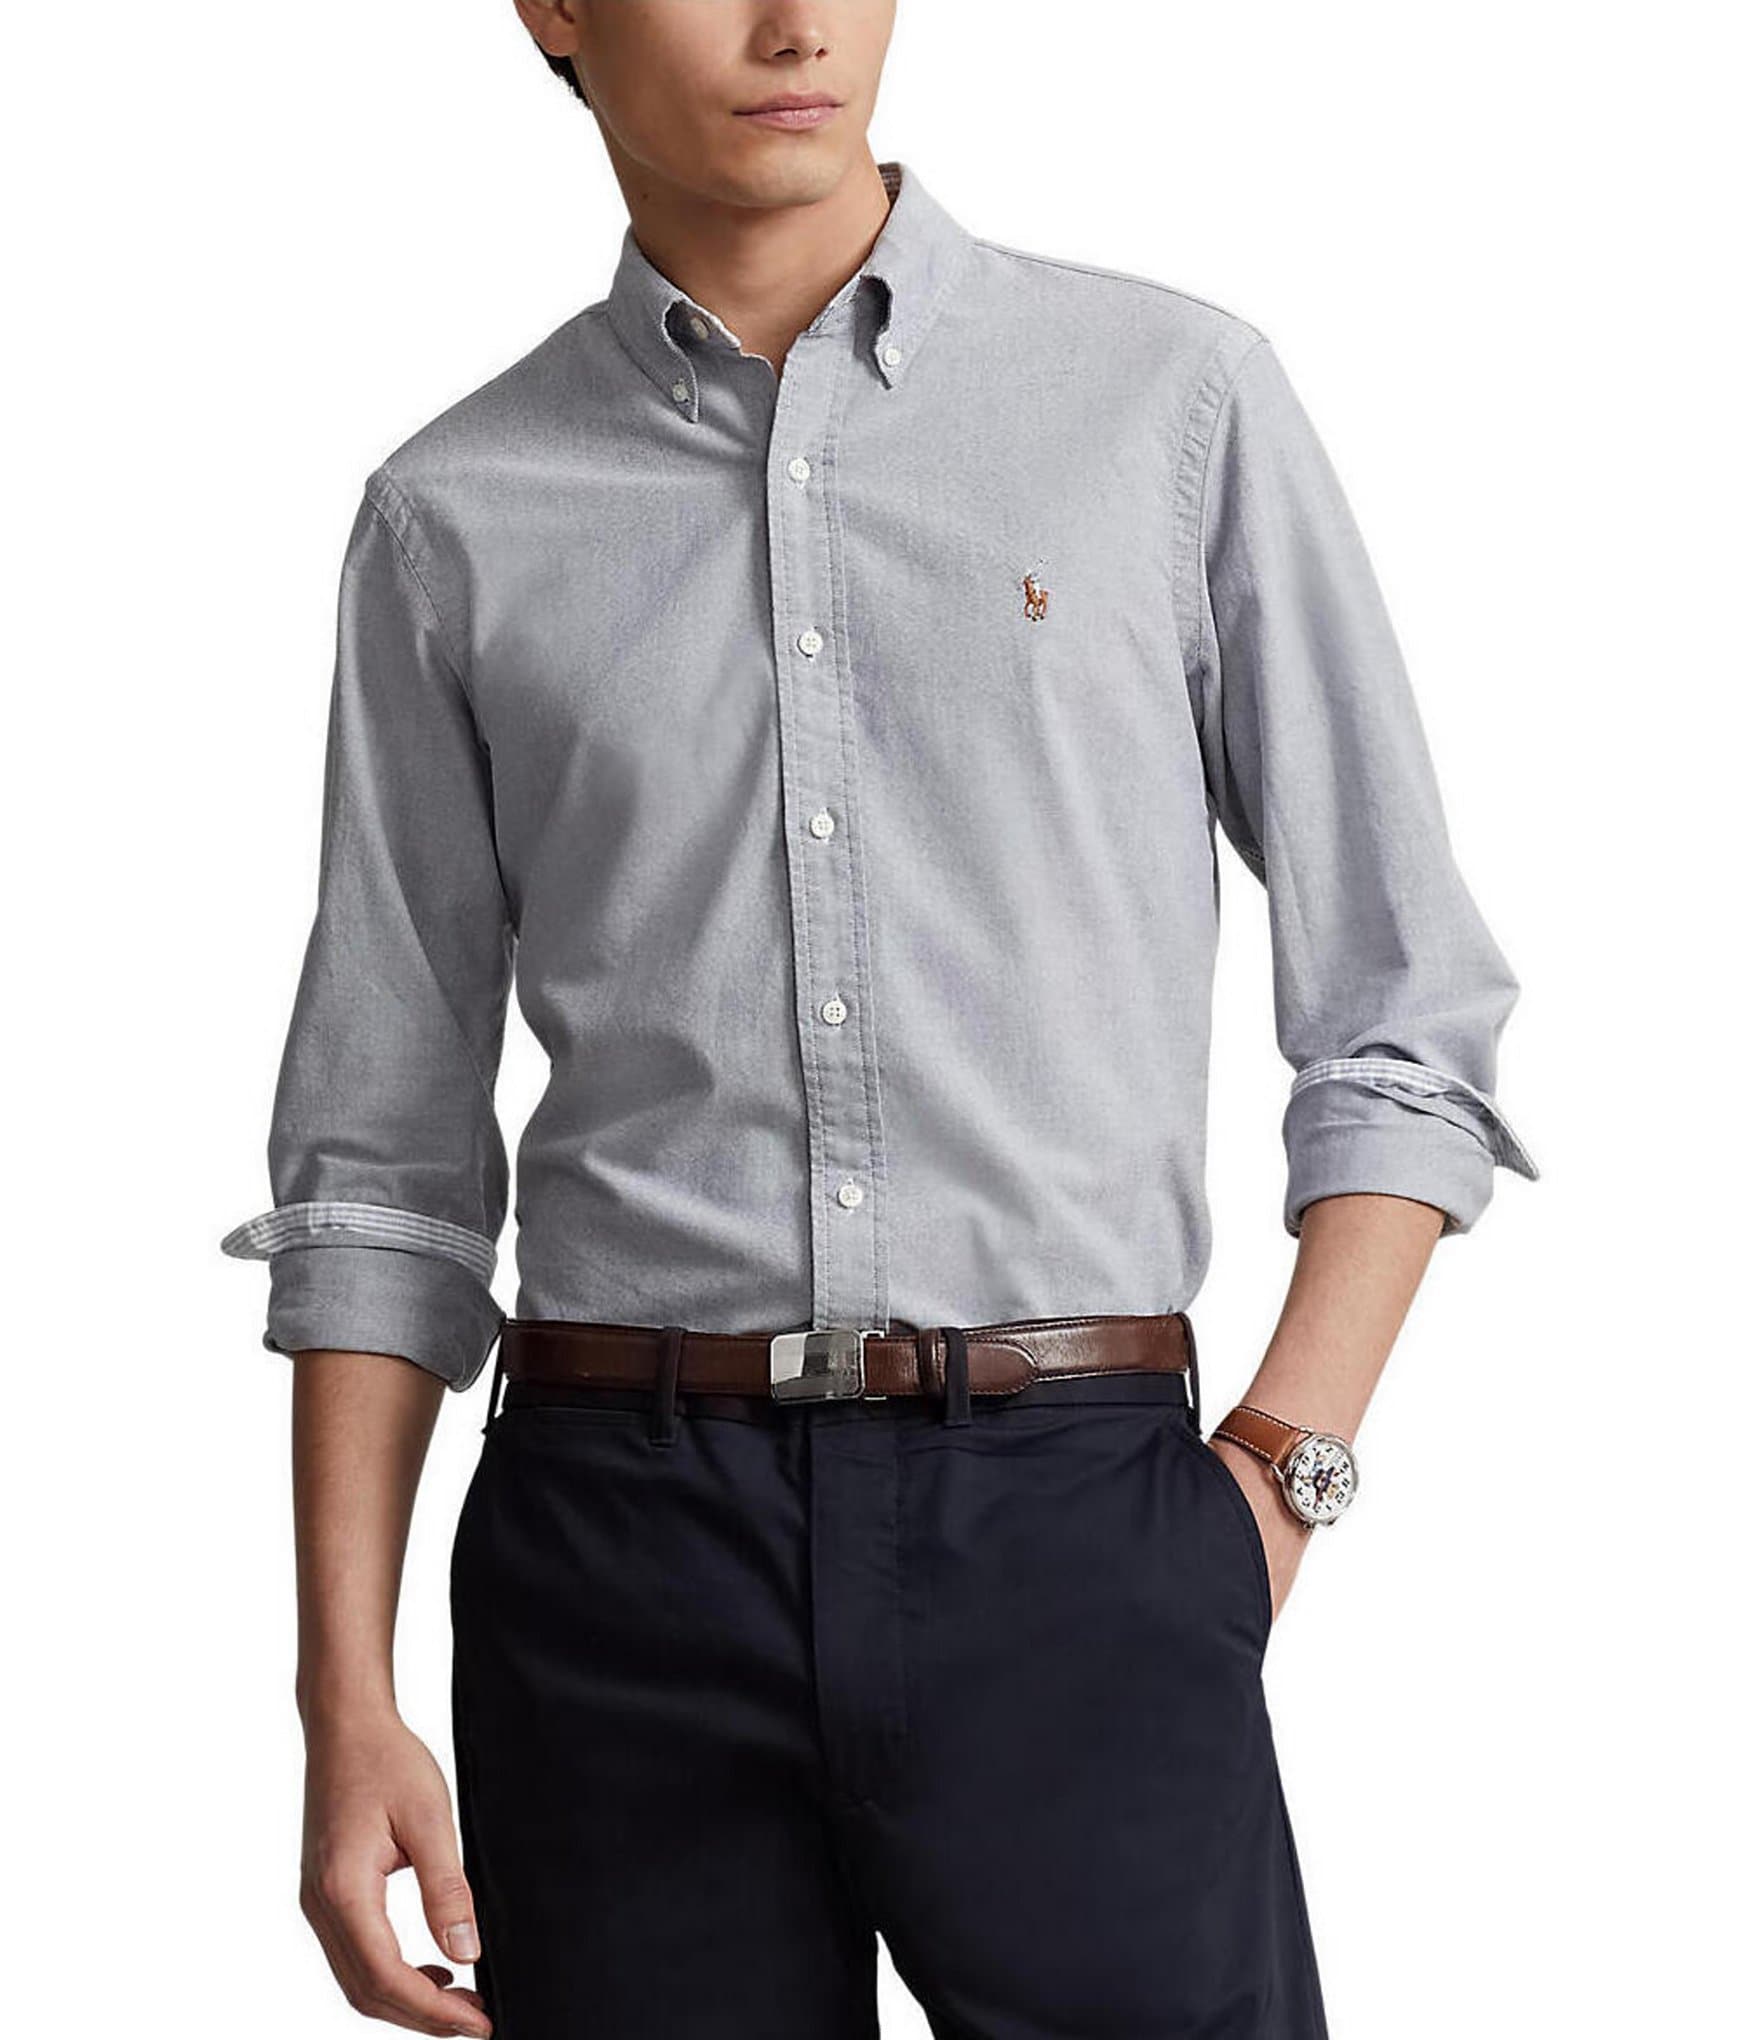 Long Sleeve Men's Casual Button-Up Shirts